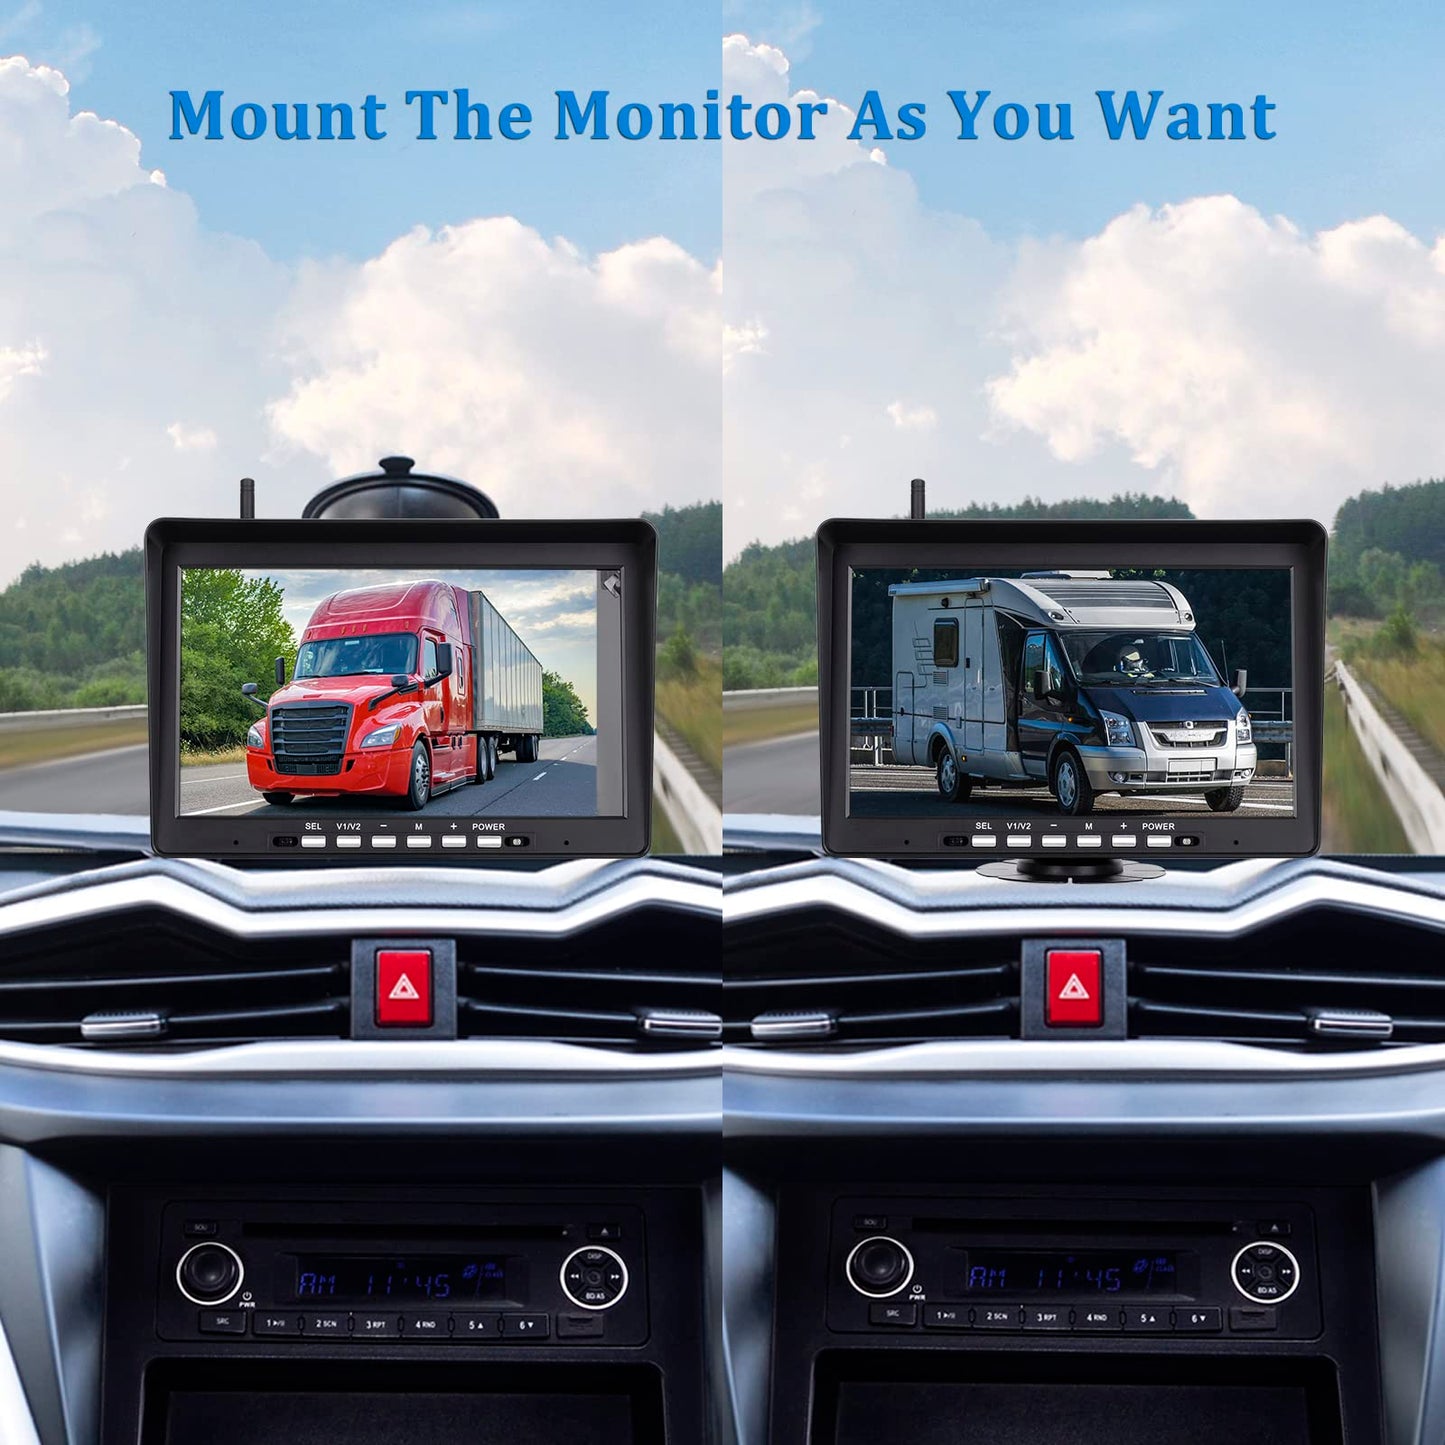 WOOCARTY 10.1" Wireless RV Backup Camera System, 1080P DVR Recording Monitor, Night Vision IP68 Waterproof Rear Side Cameras for Truck/Trailer/Camper, 32GB SD Card, Compatible with Furrion Mount